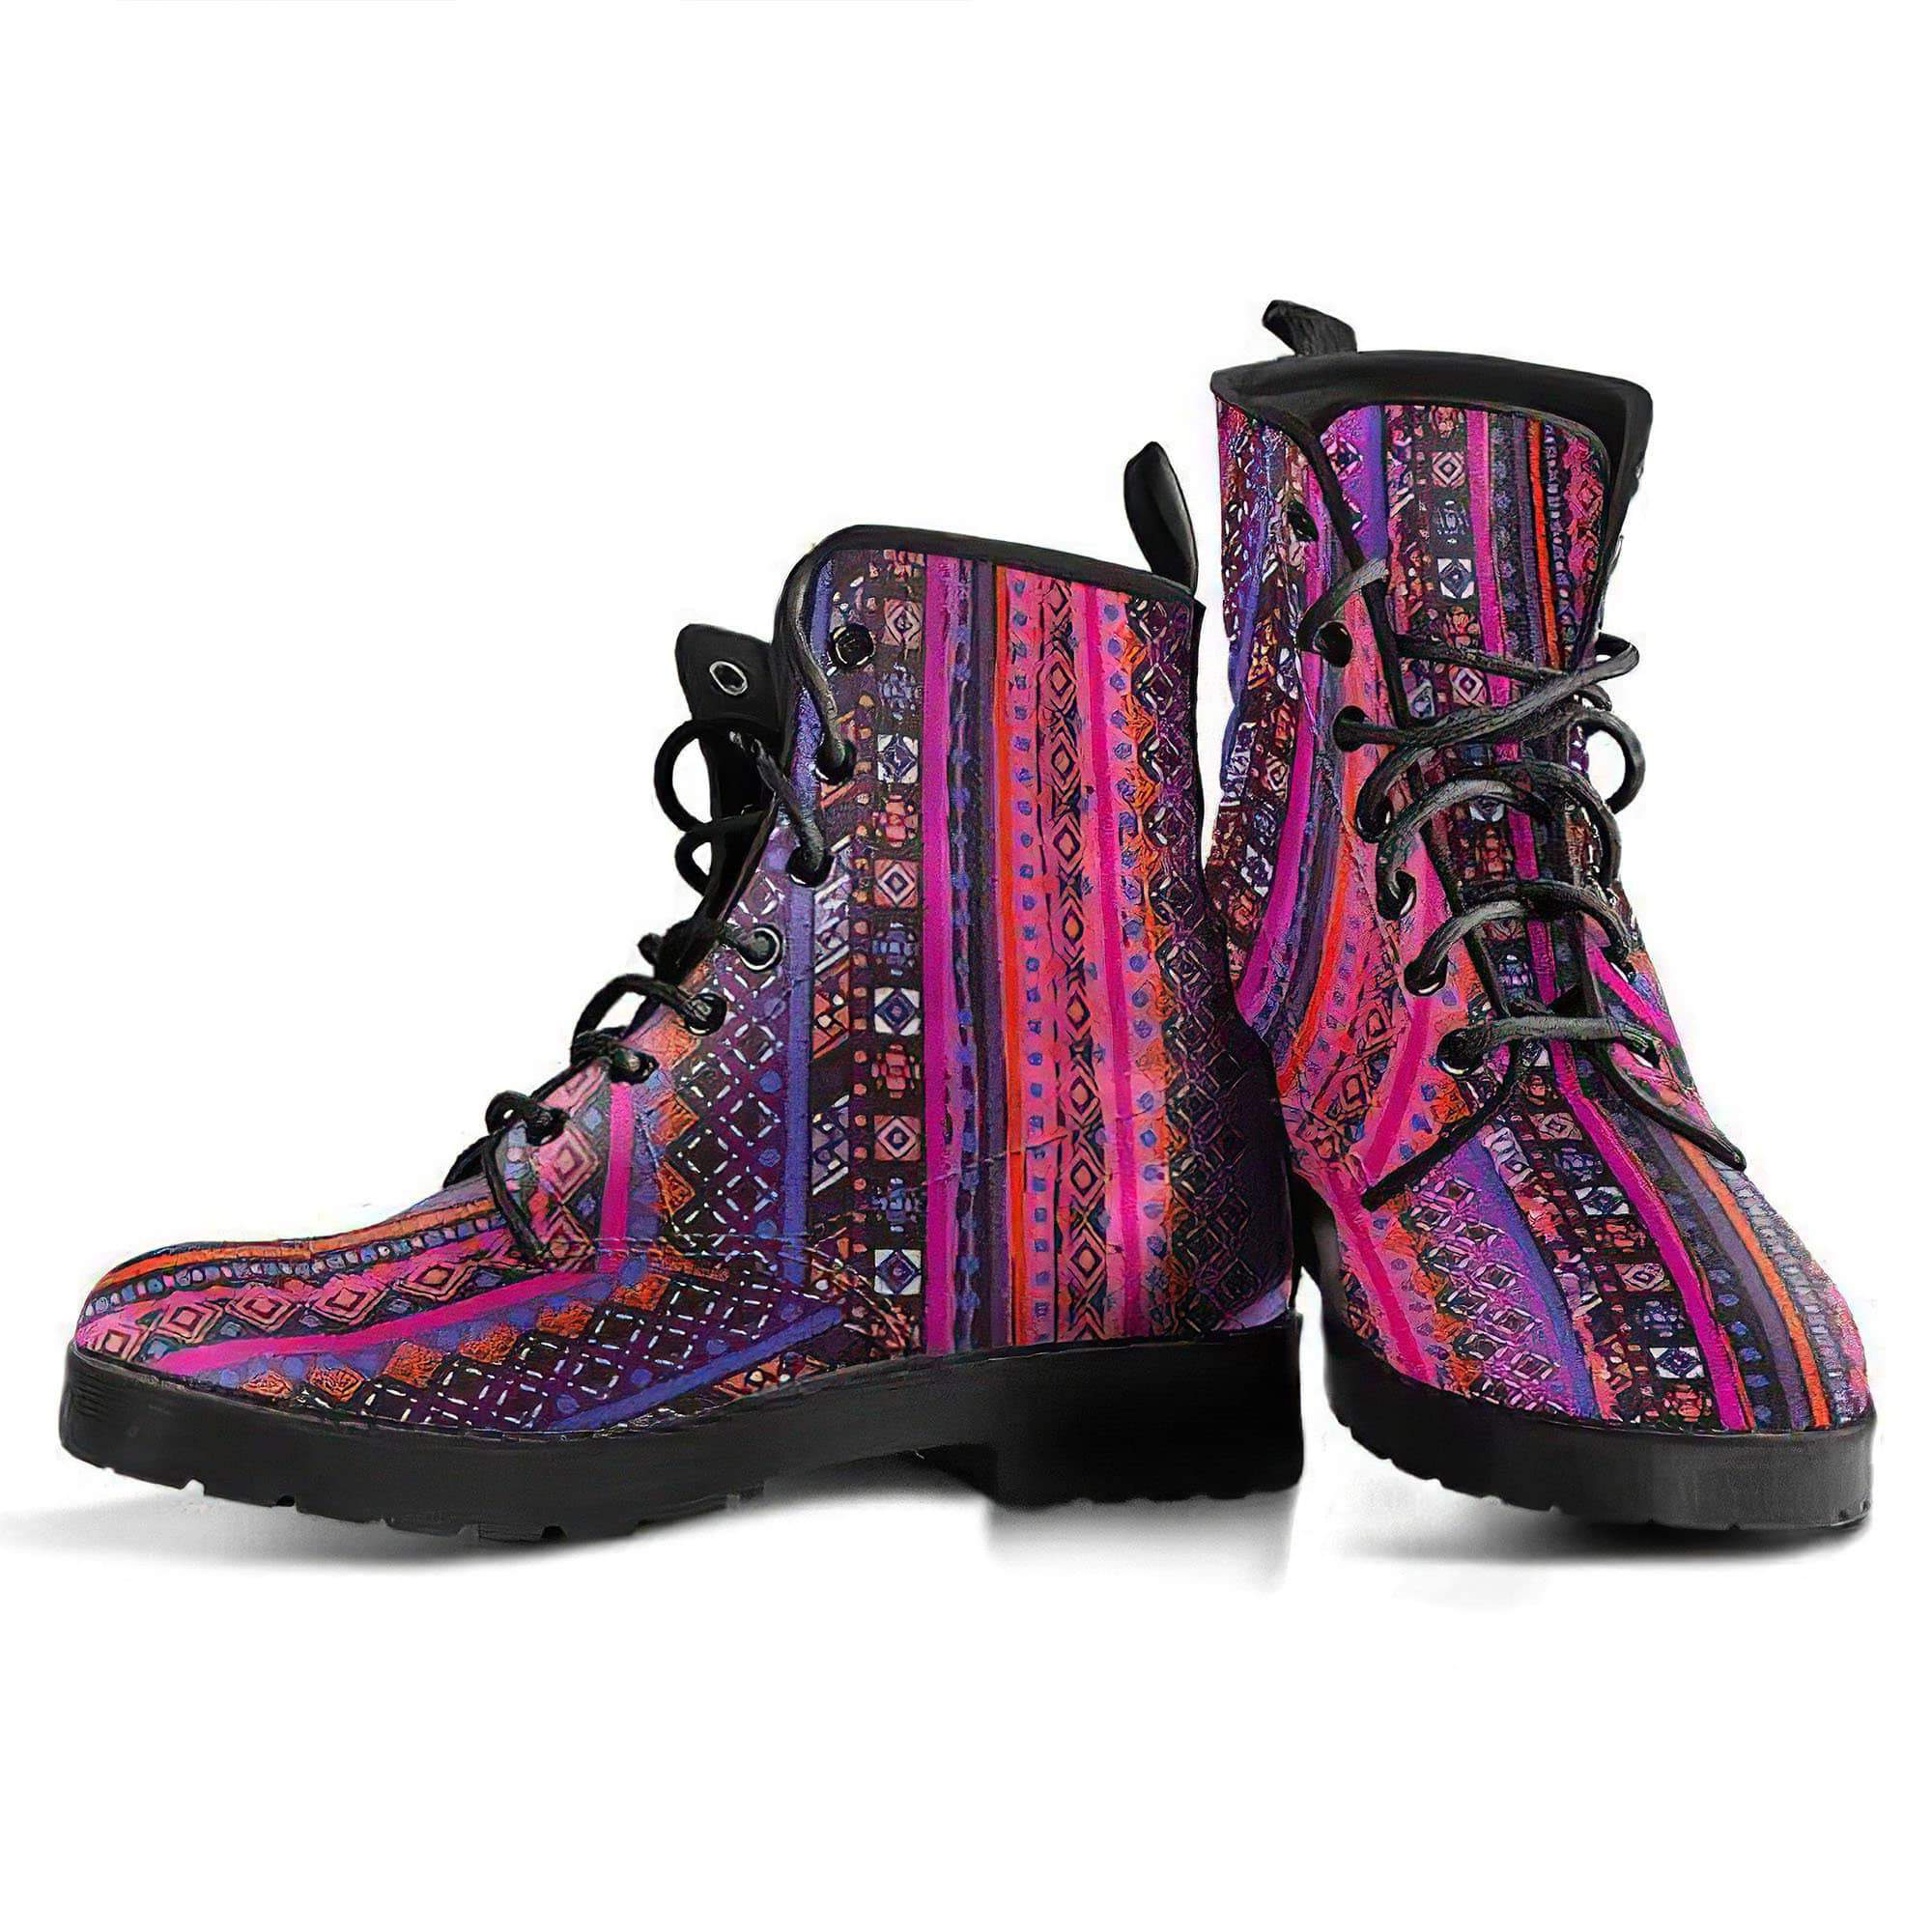 pink-boho-stripe-handcrafted-boots-women-s-leather-boots-12051931267133.jpg